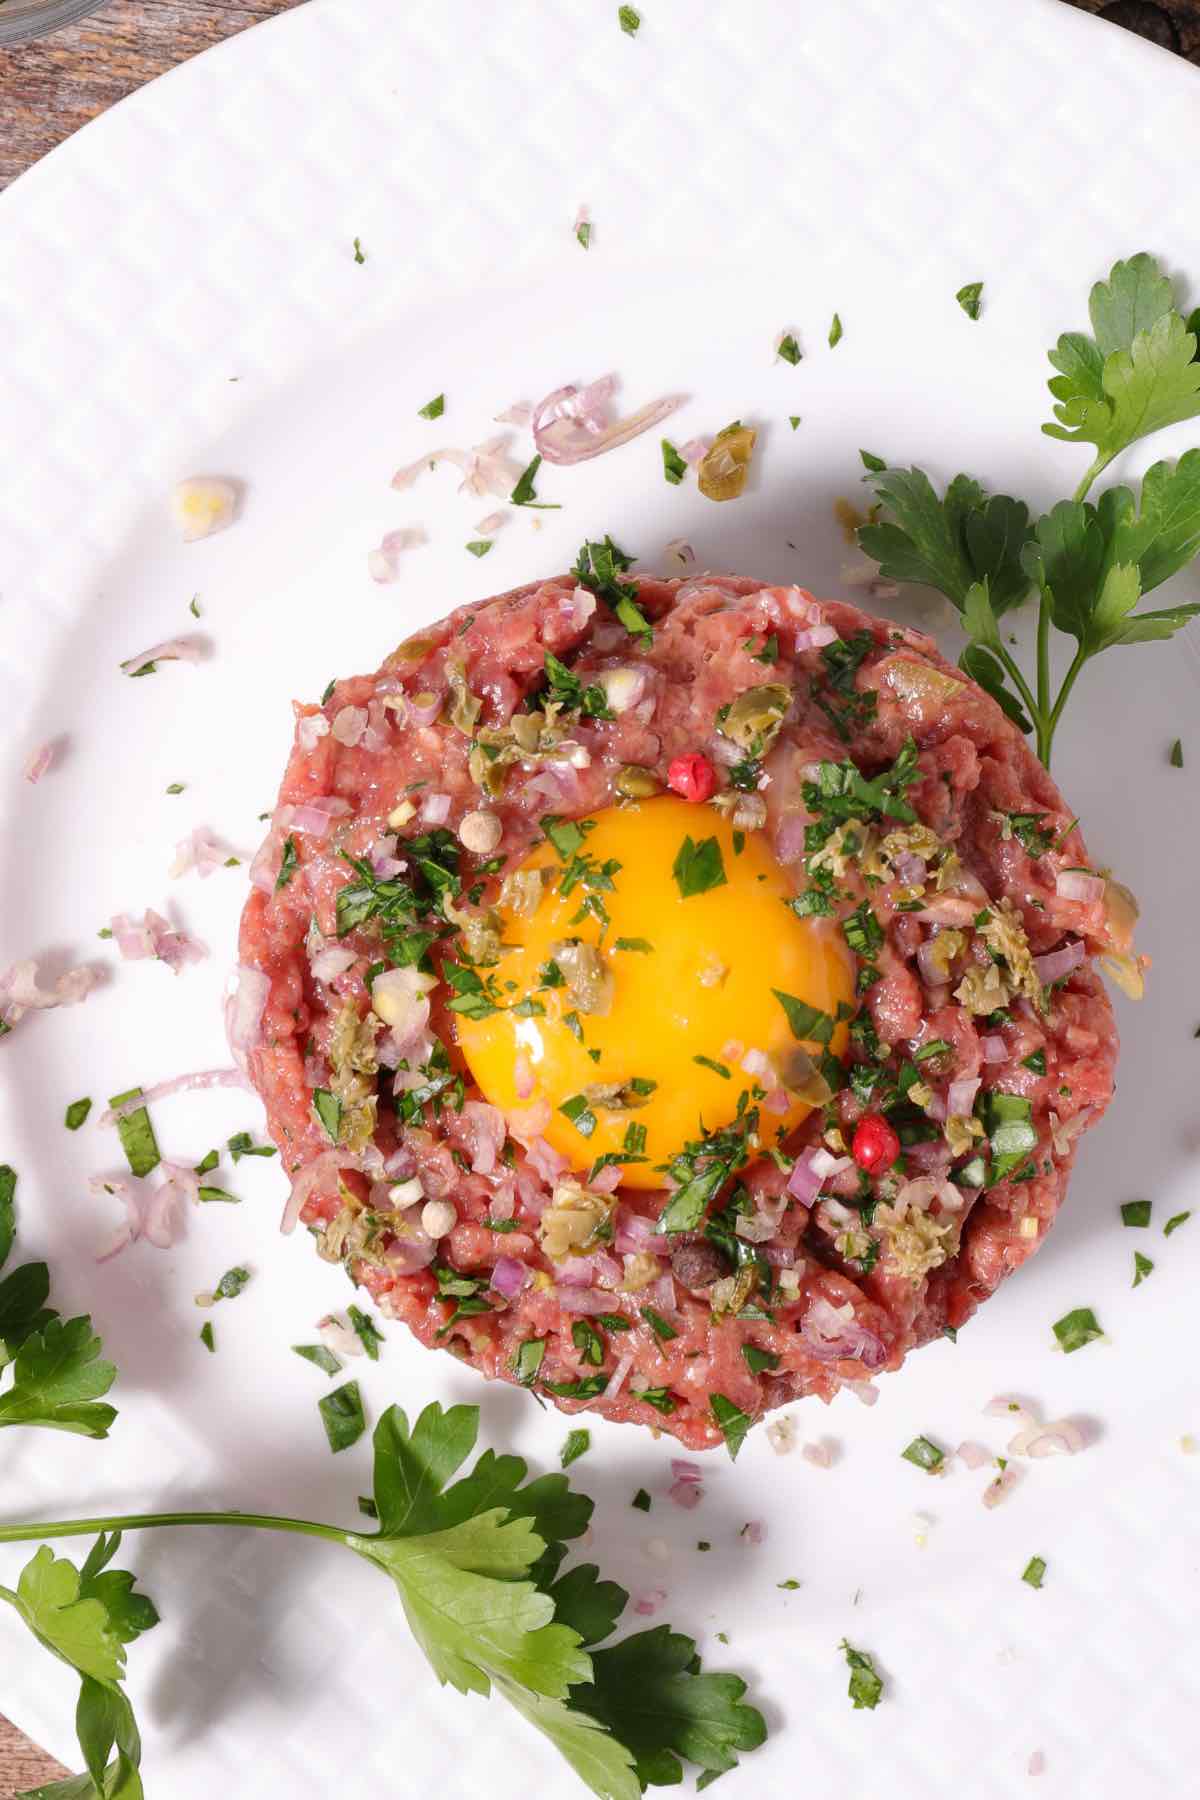 recipe to make meal with raw hamburger meat and raw eggs